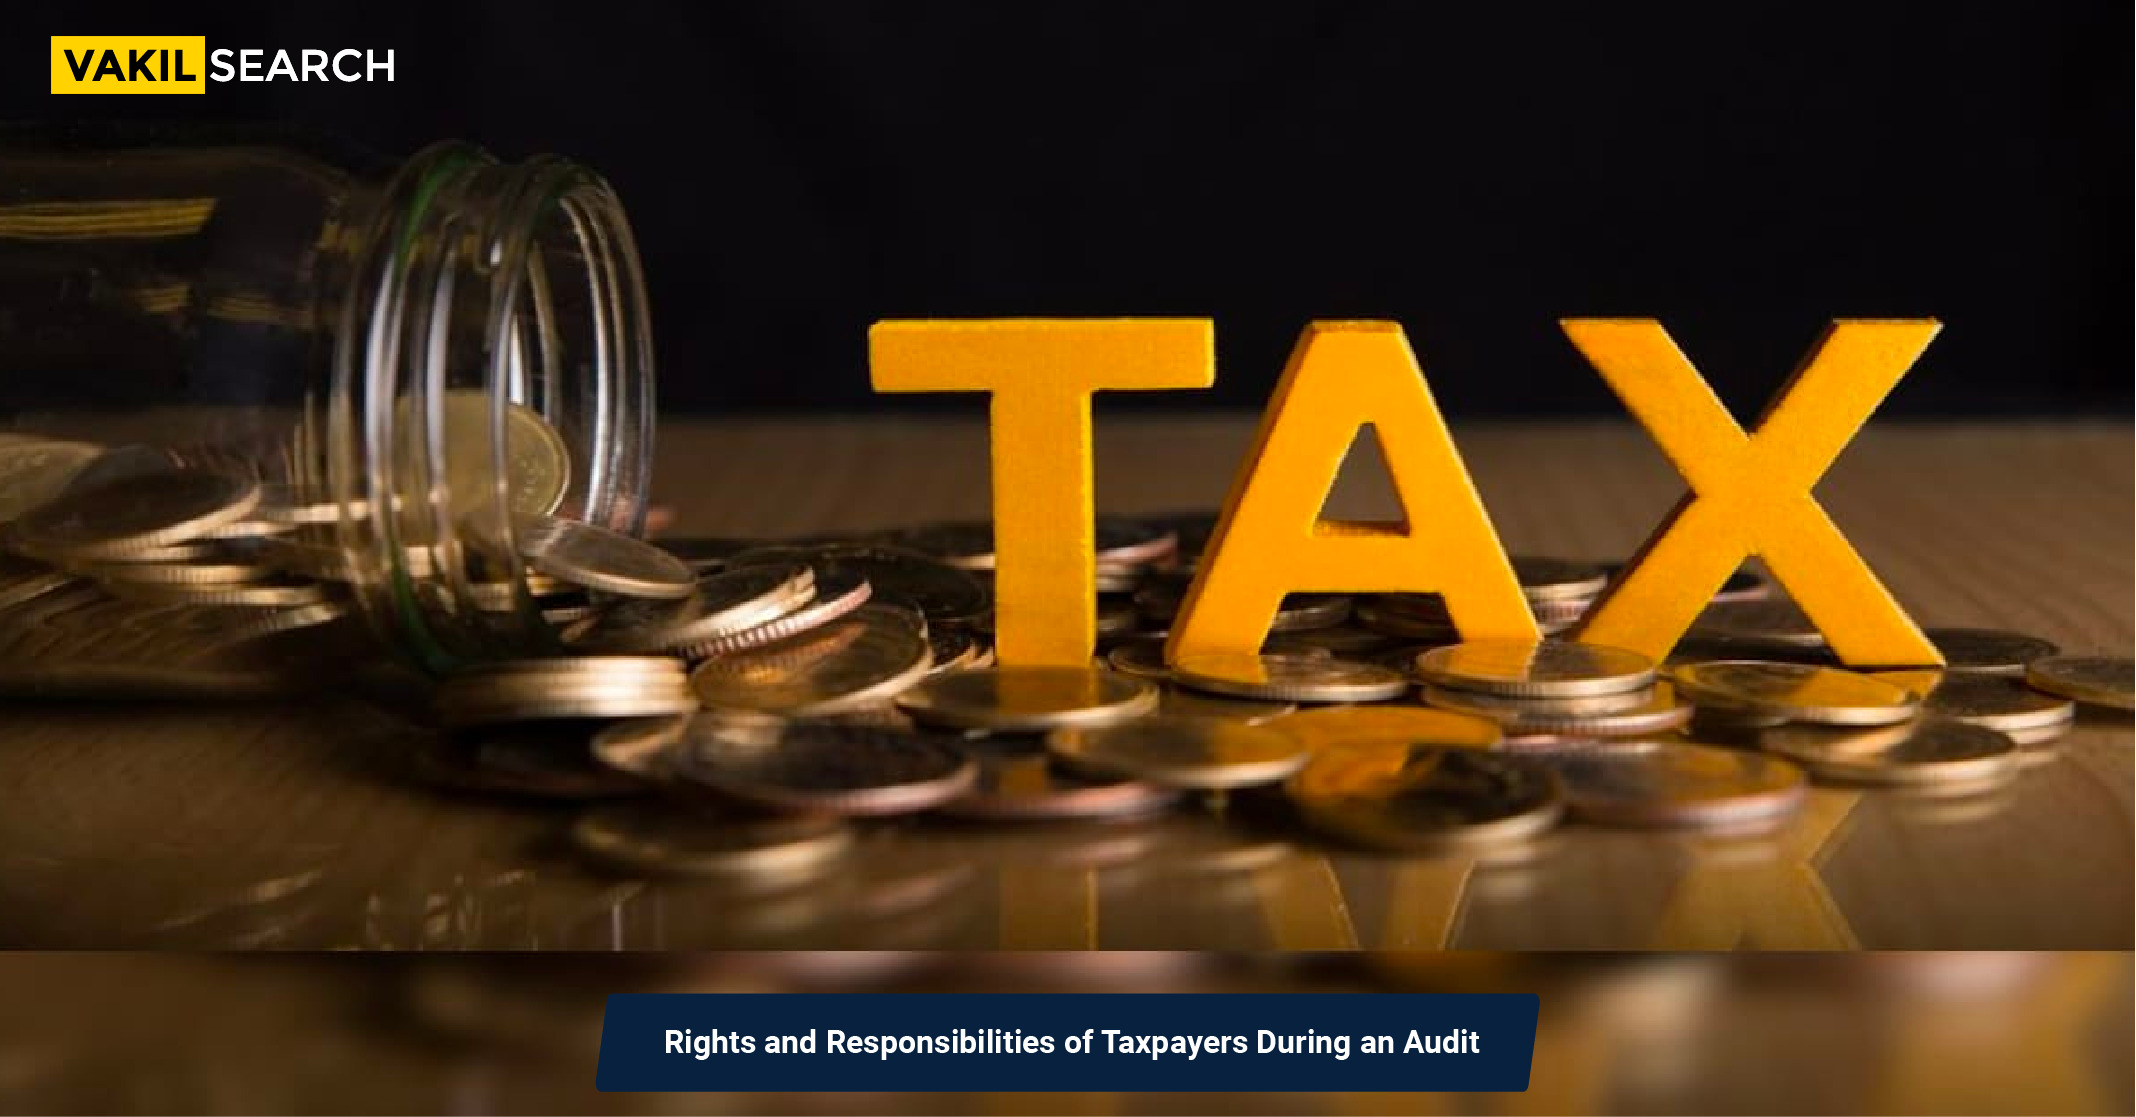 Rights and Responsibilities of Taxpayers During an Audit